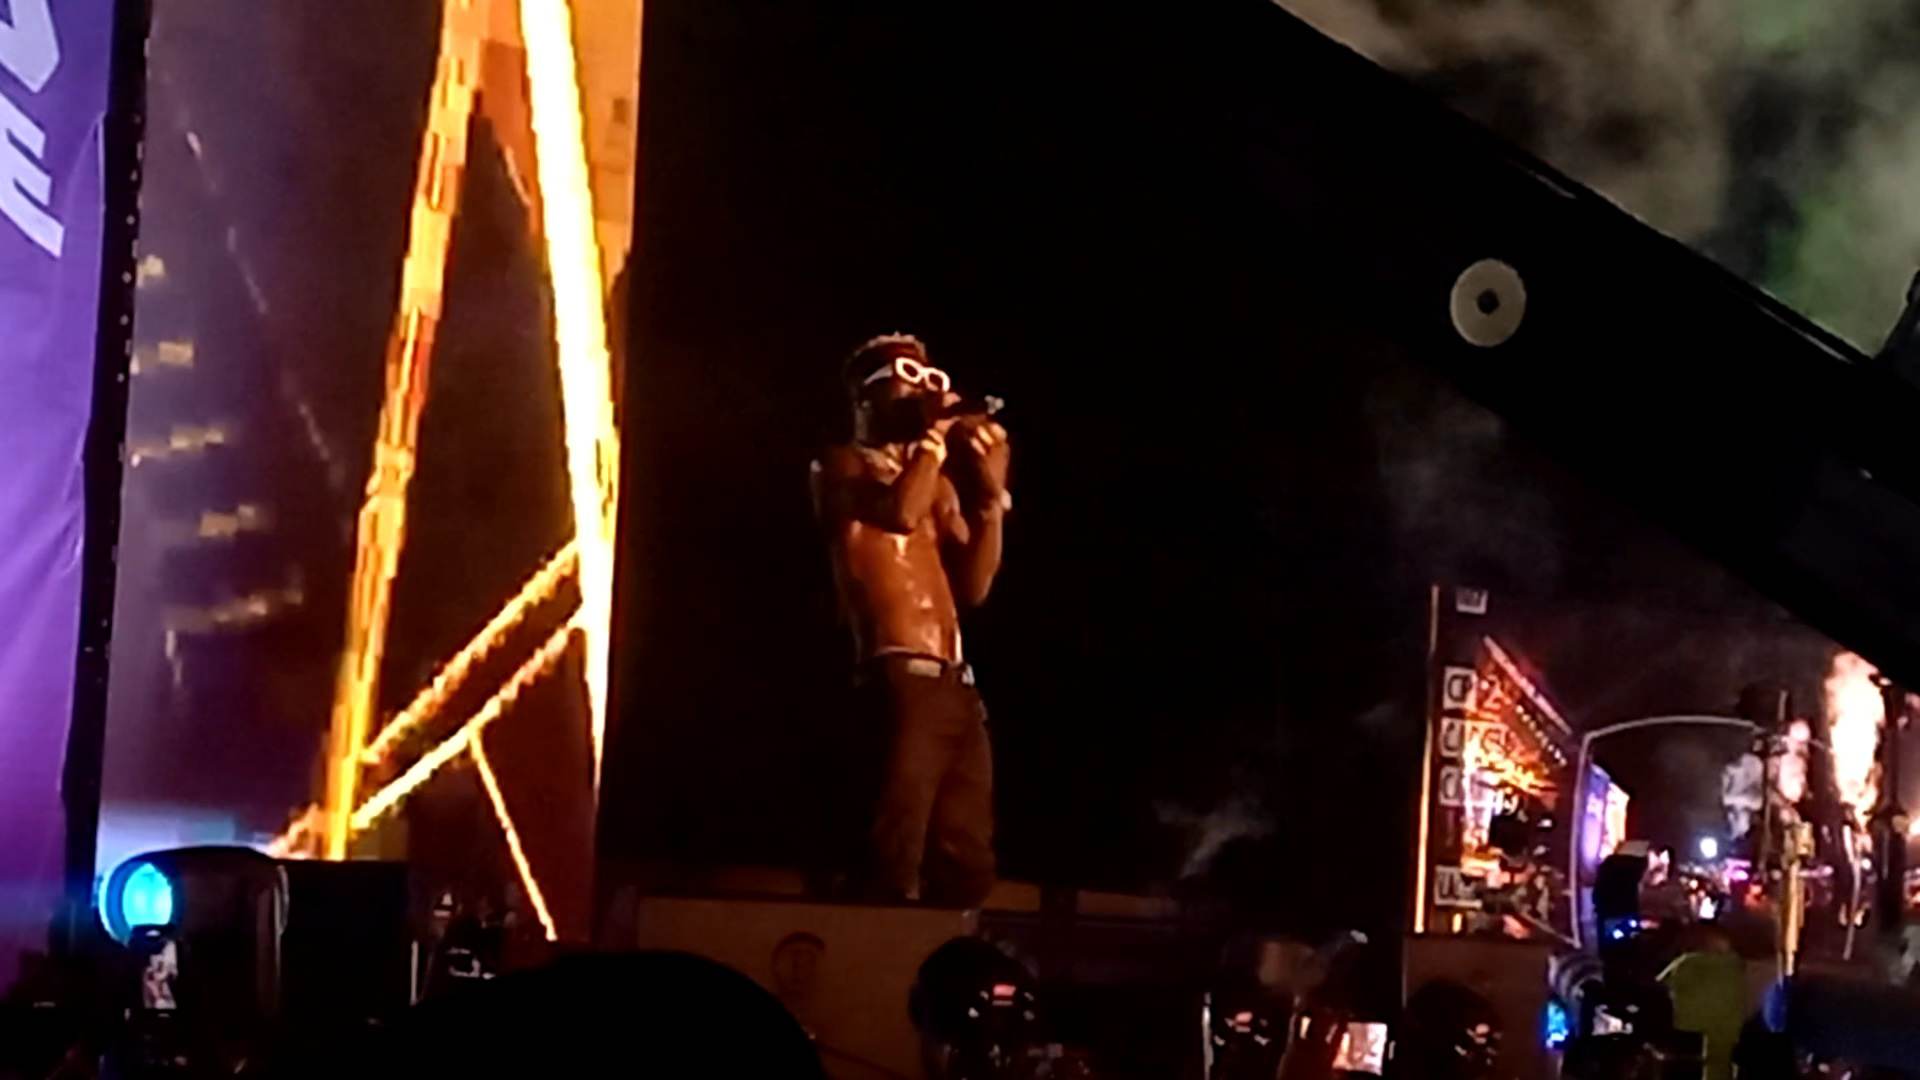 Shatta Wale makes up for Burna Boy’ absence at Day 1 of Afrochella